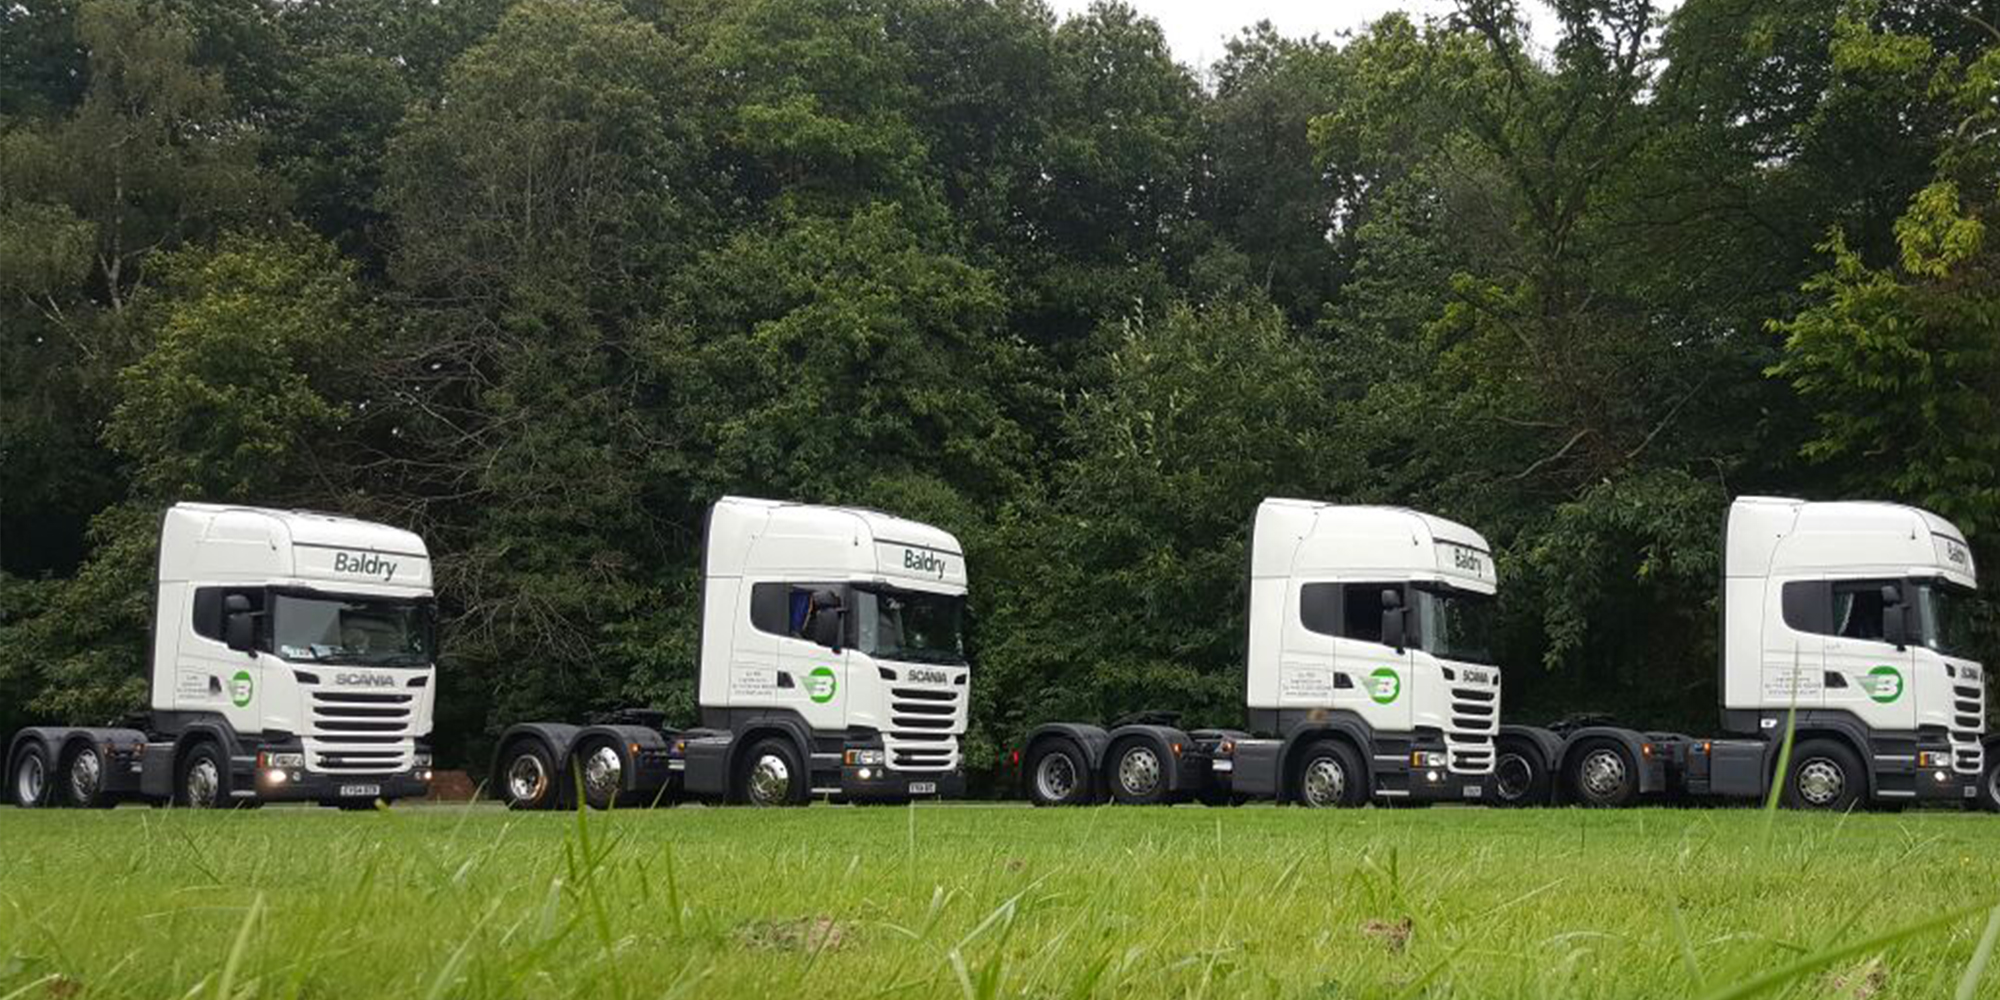 he-baldry-haulage-gallery-line-up-delivery-solutions-transport.jpg